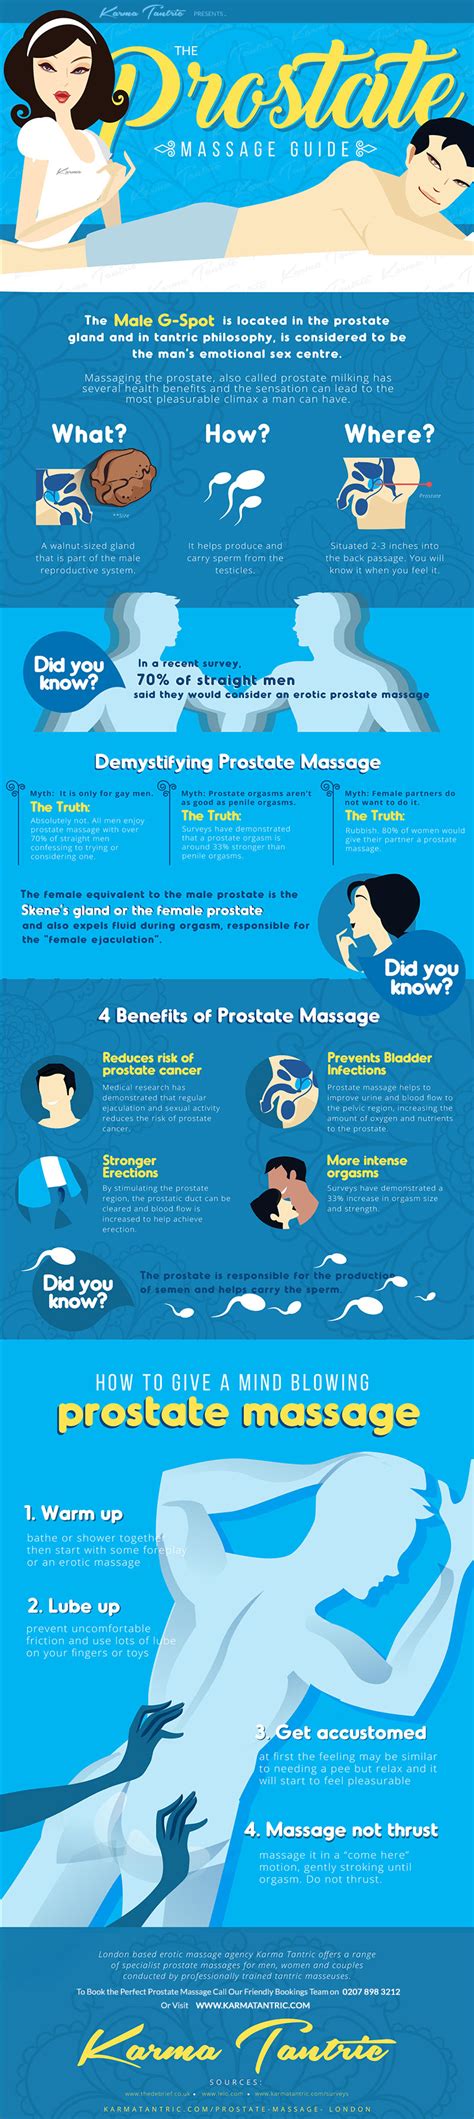 prostate milking 14 tips and positions to massage the prostate